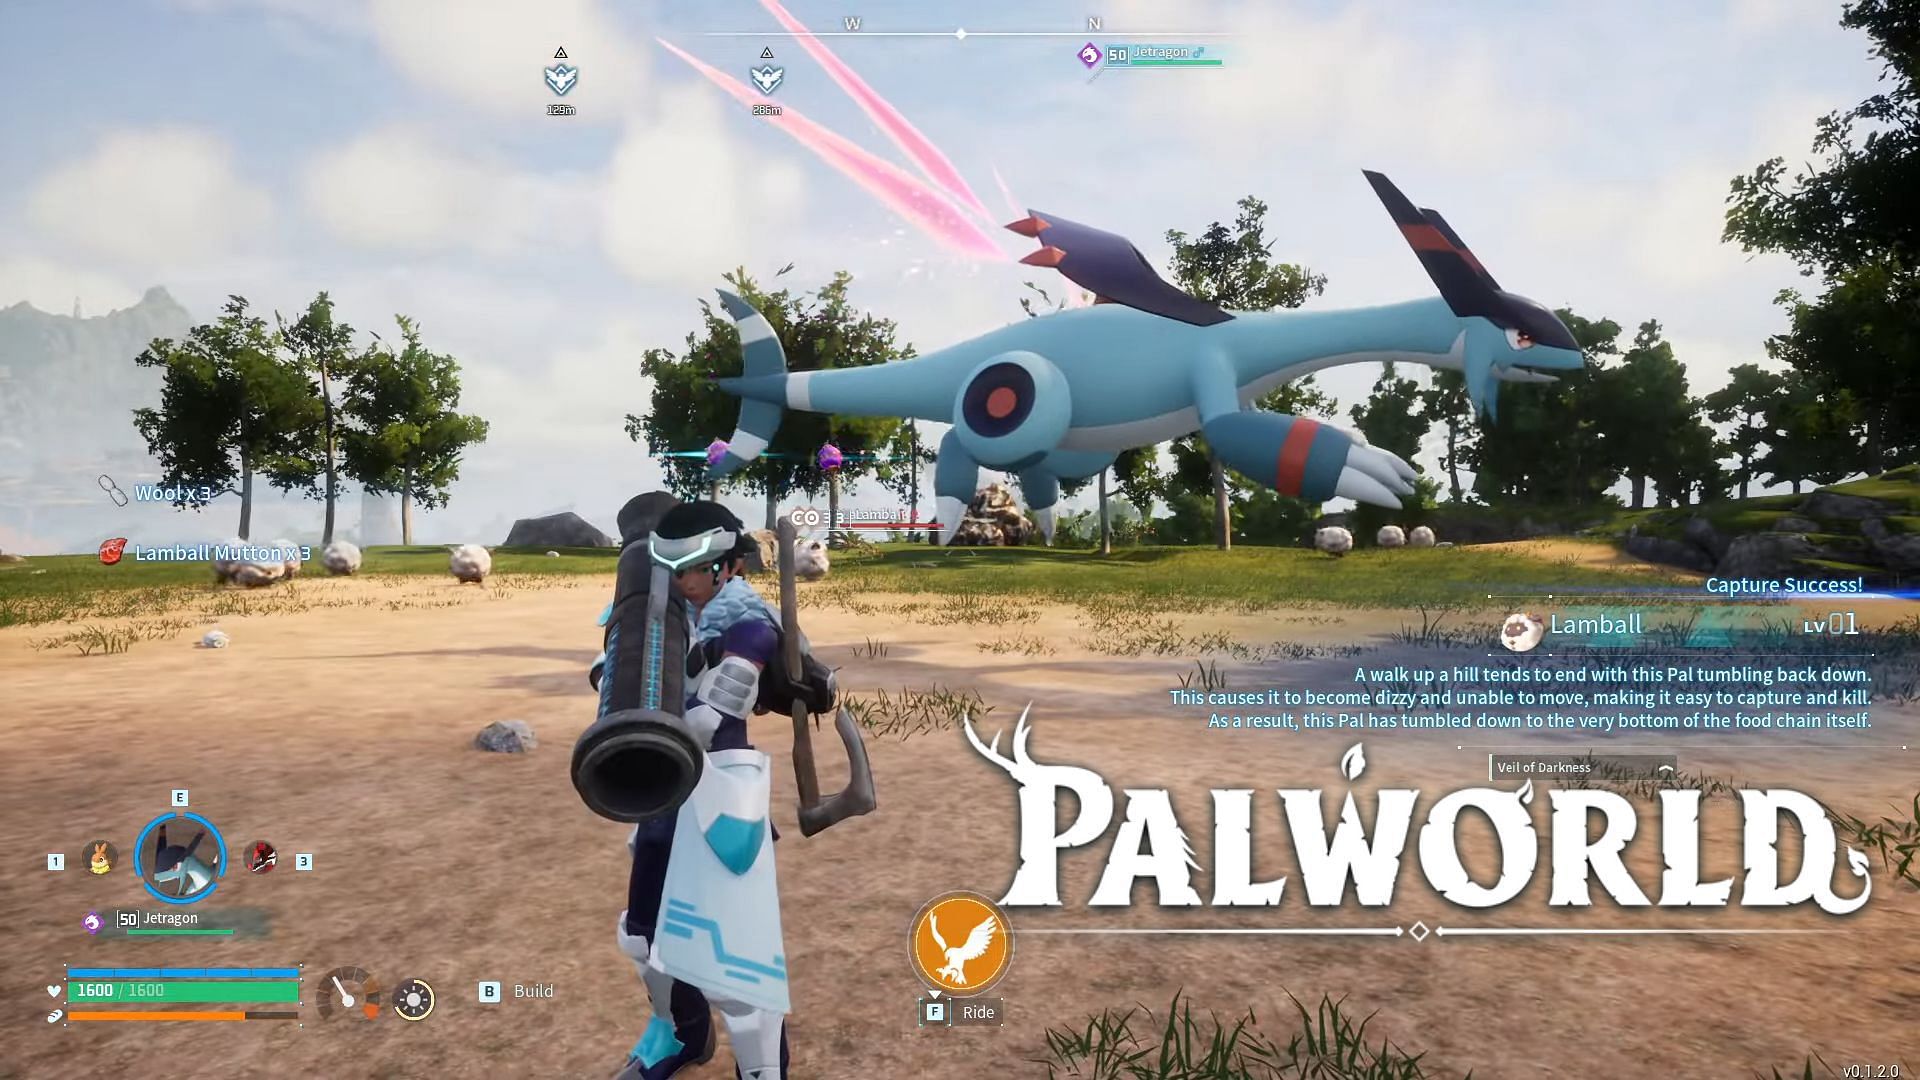 Sphere Launchers in Palworld offer a technological twist to capturing Pals.